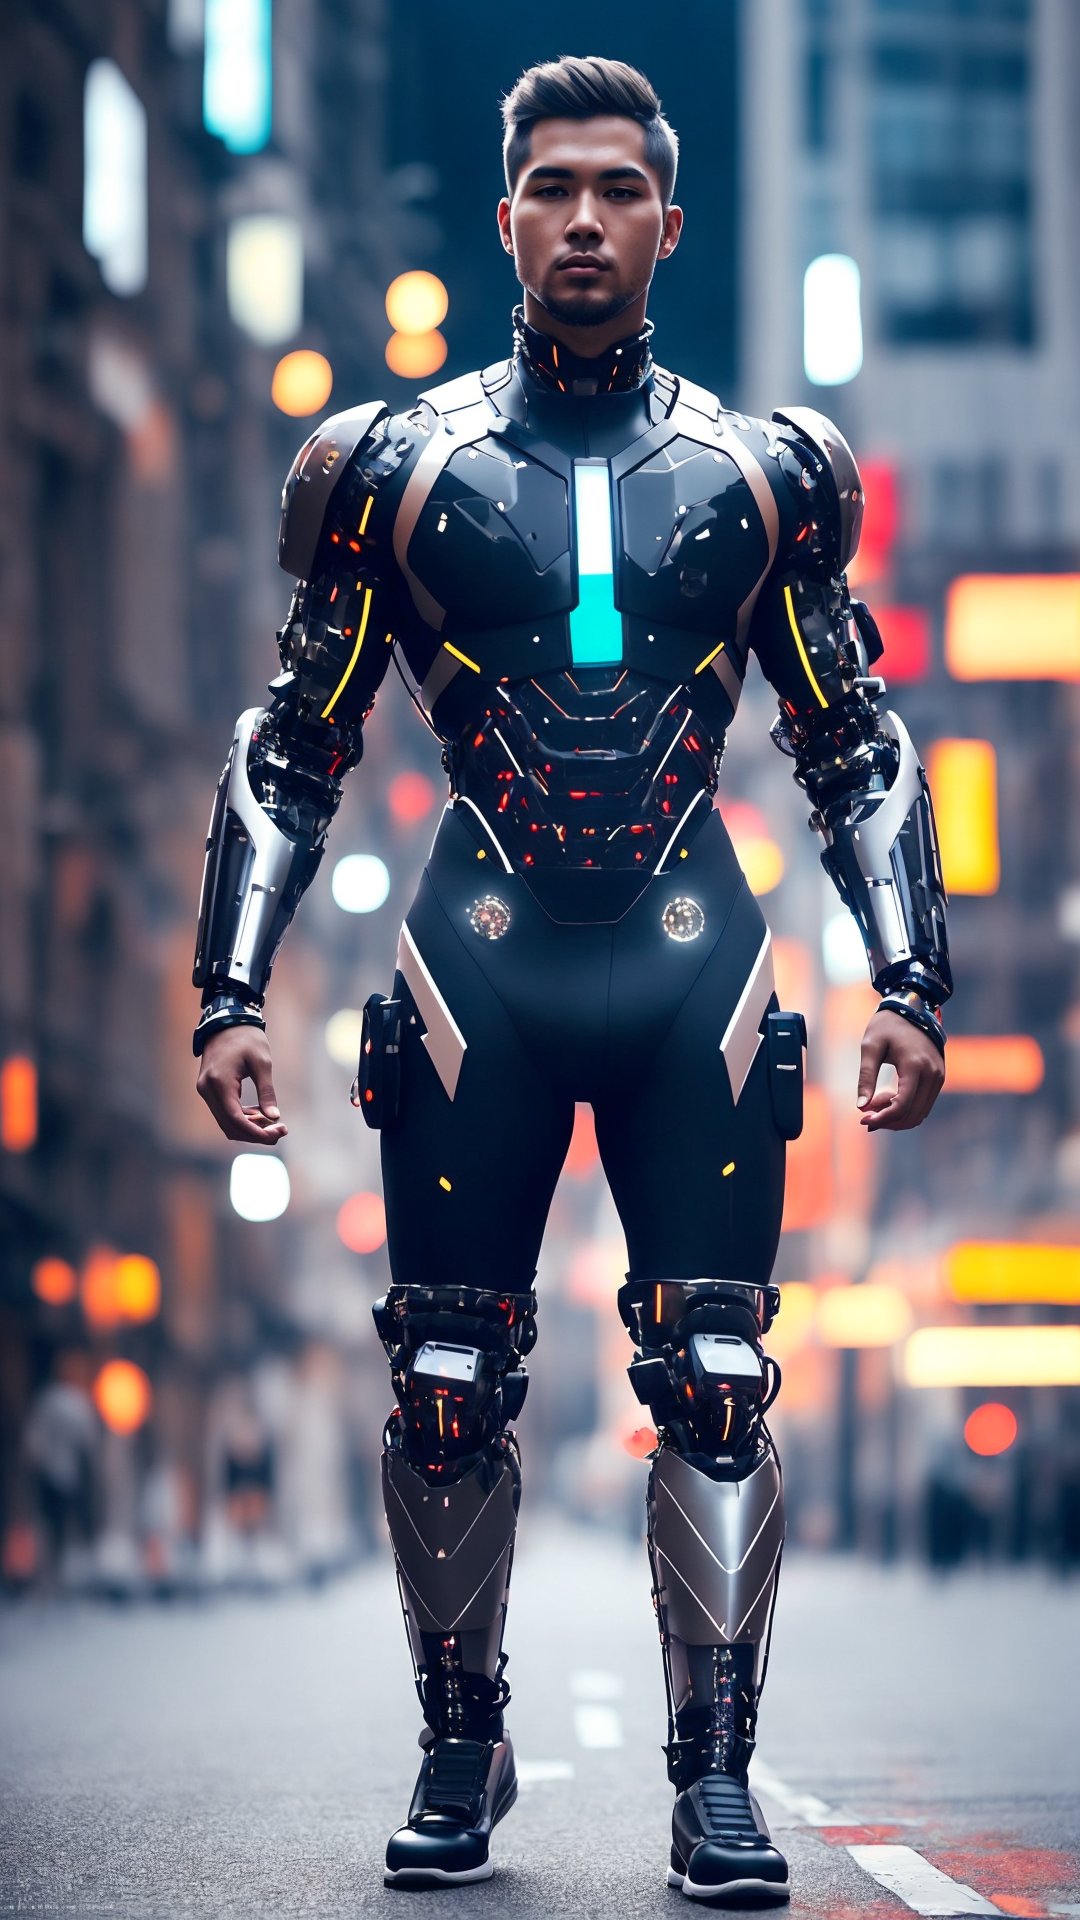  A young Indigenous man with long, braided hair and intricate cybernetic tattoos, wearing a high-tech bodysuit that seems to merge with his own biology. The suit is organic and fluid, with bioluminescent elements that pulse in rhythm with his heart. The pose is meditative, as he connects with the city's bio-network through neural interfaces, cyber_armor,photorealistic